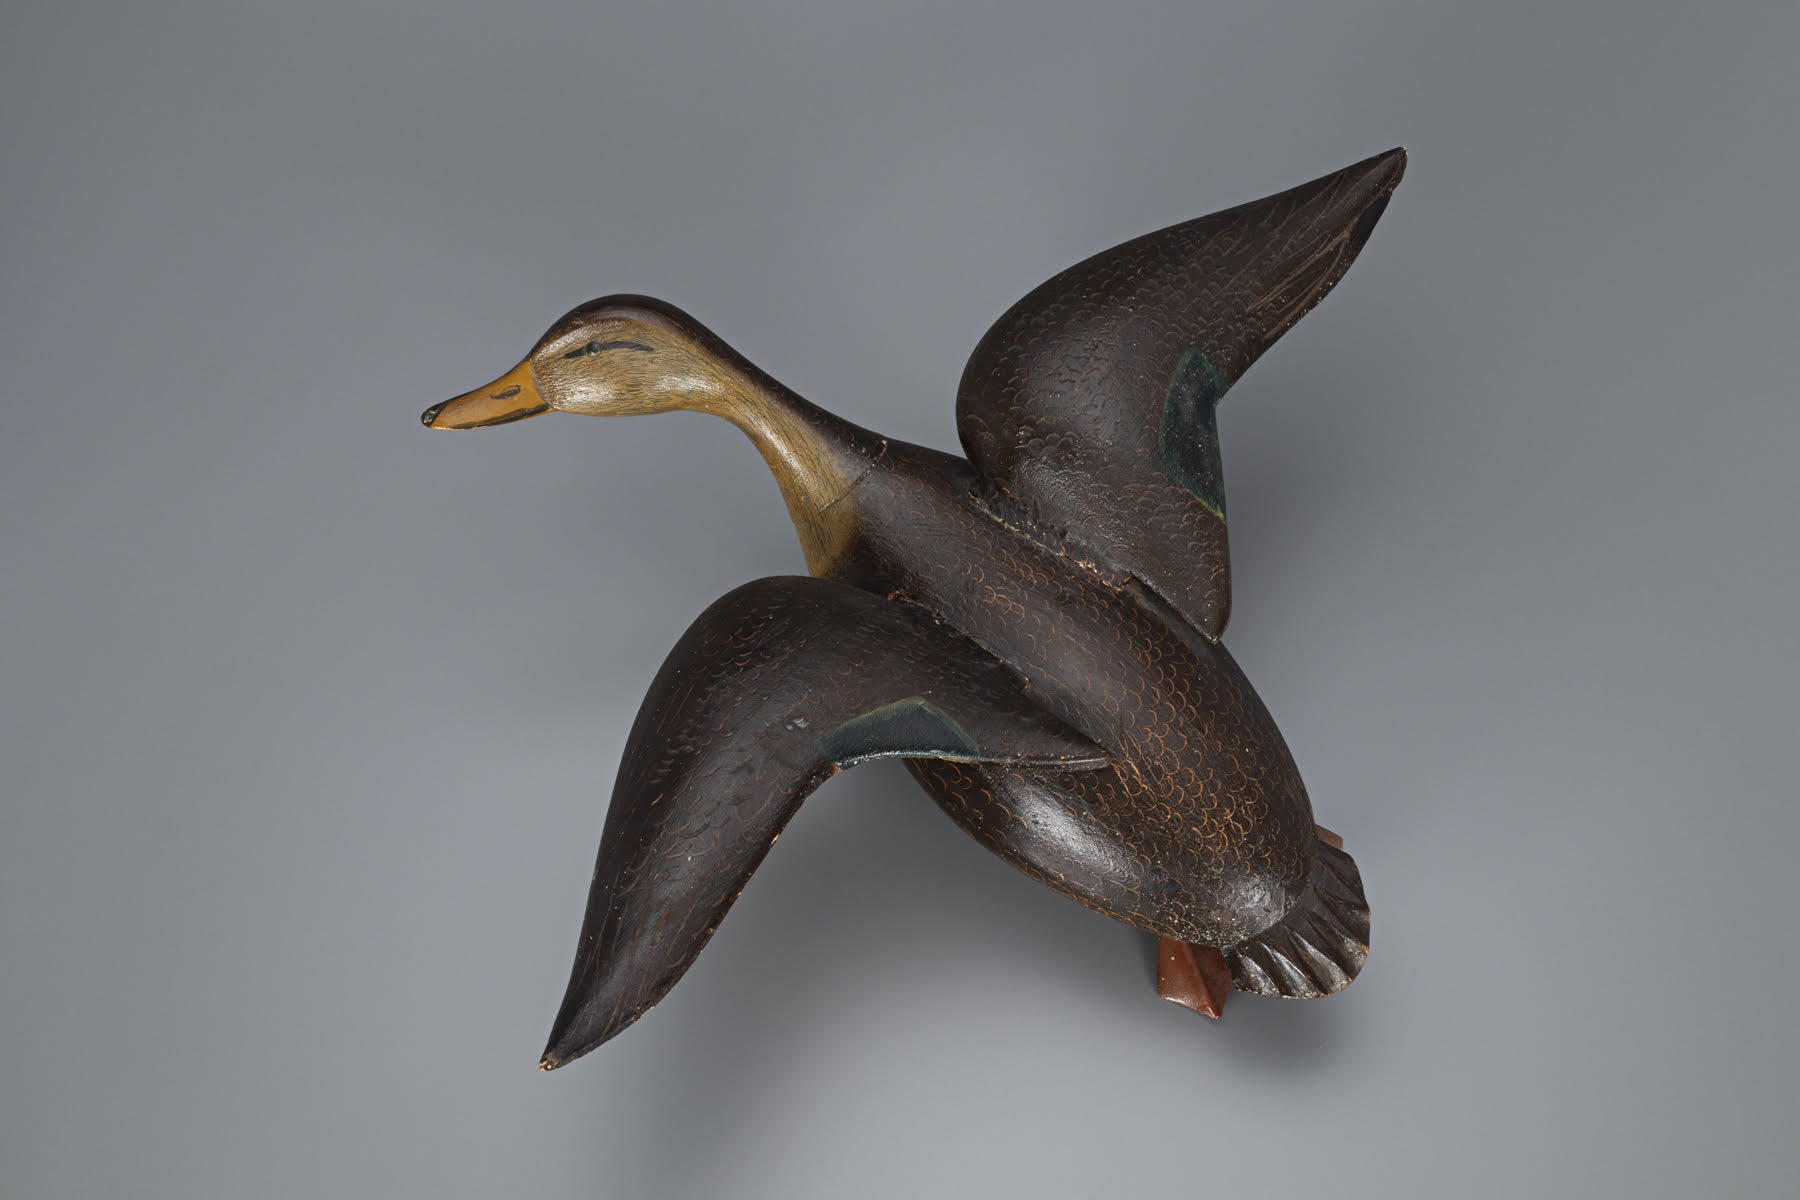 An Ira Hudson flying black duck, offered at Copley Fine Art Auctions in February 2019.